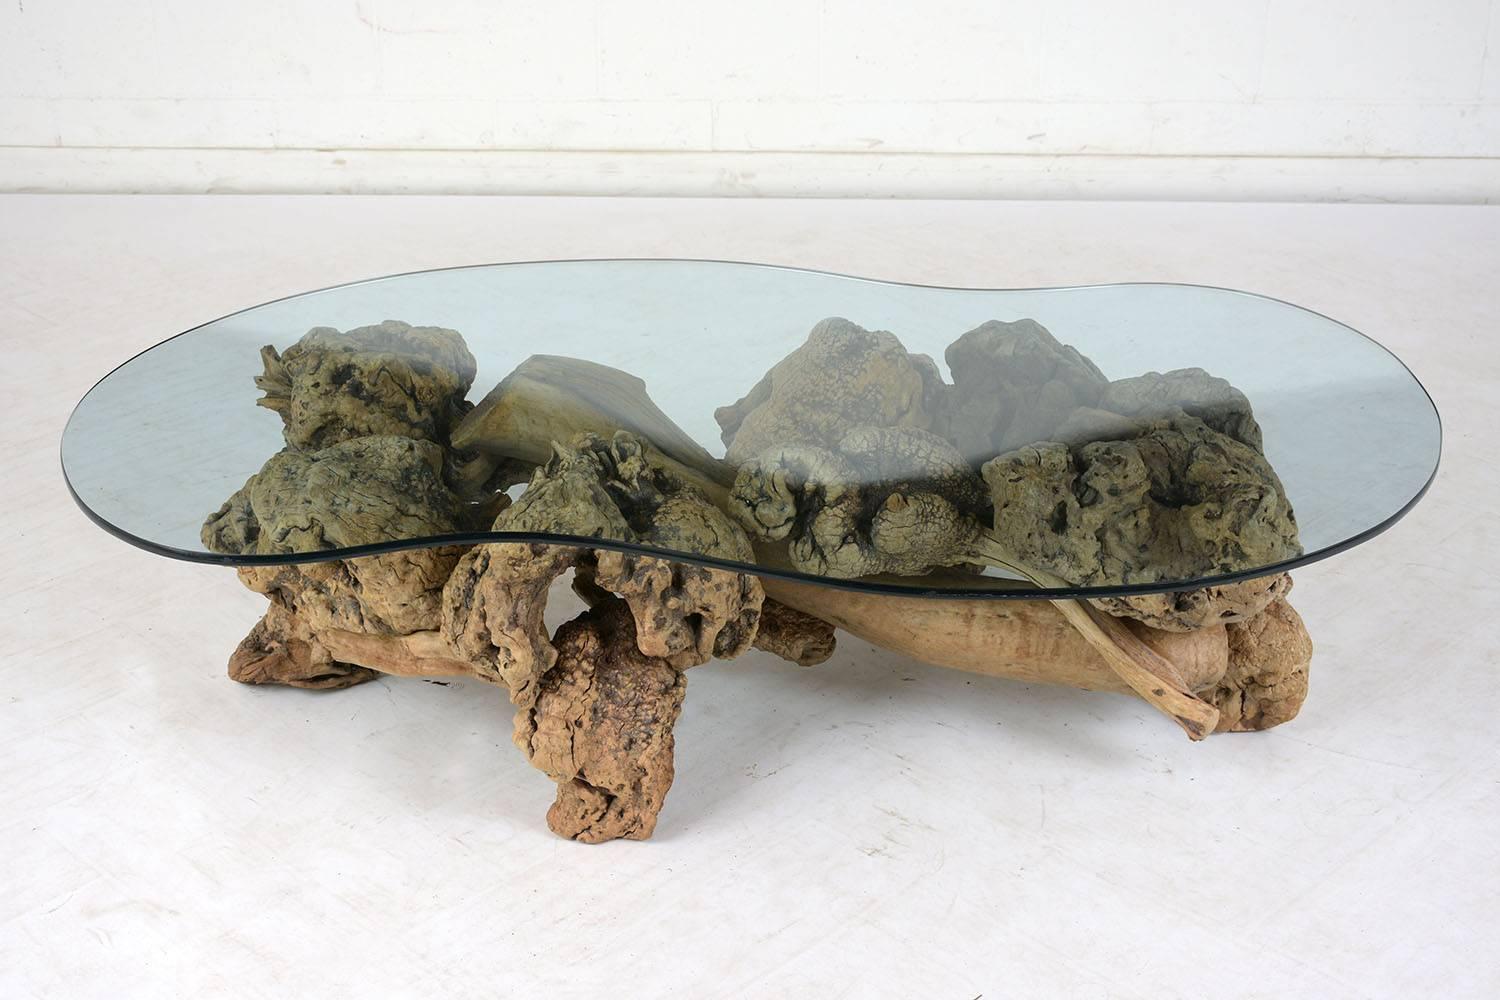 This 1960s mid century coffee table features a stunning organic form tree root as its base. The natural stained tree root has many different textures with both knotted and smooth sections and dates to the early 1900s. The kidney-shaped glass top is